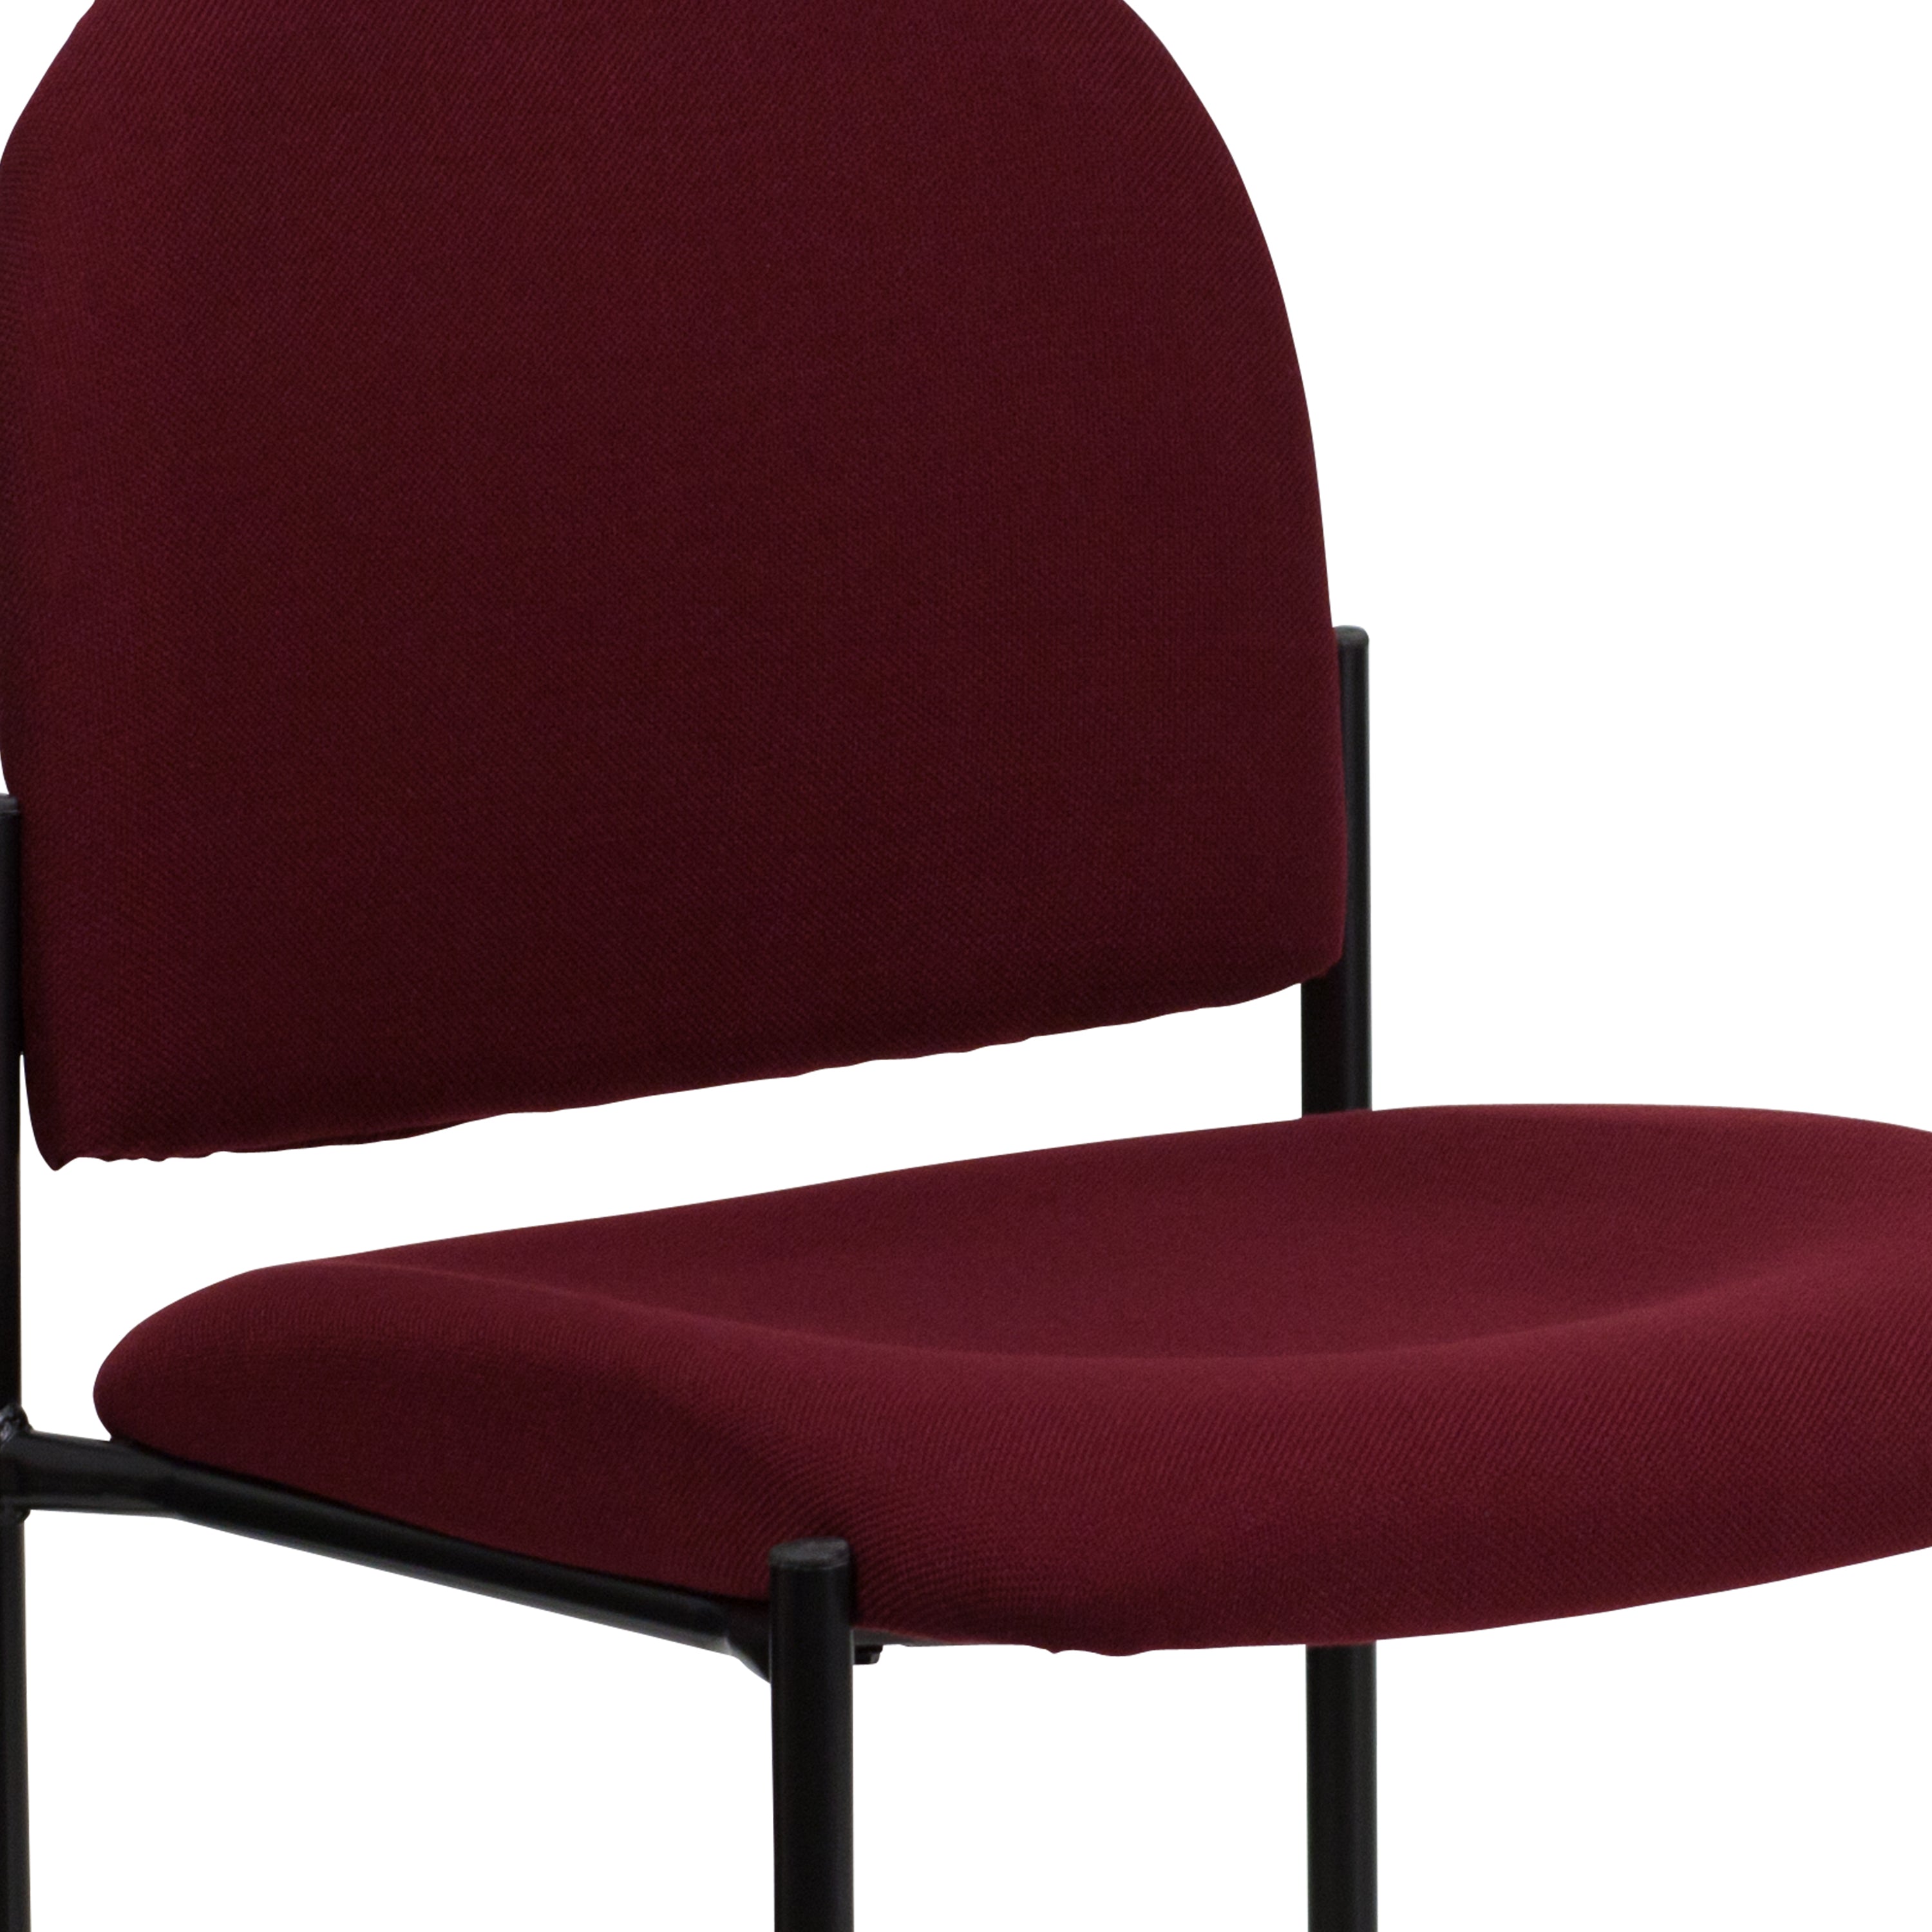 Comfort Stackable Steel Side Reception Chair-Side Stack Chair-Flash Furniture-Wall2Wall Furnishings